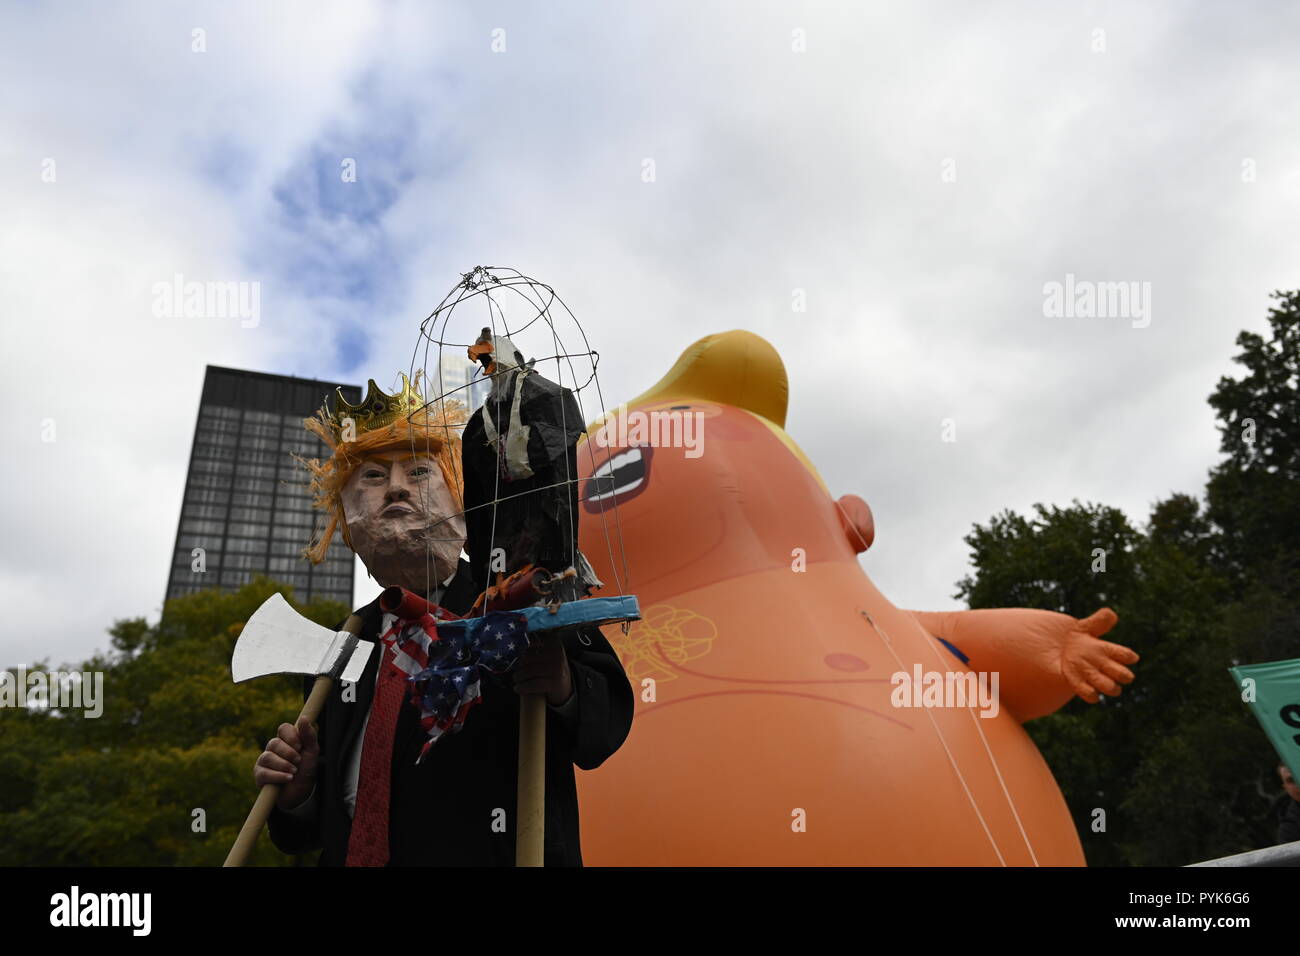 New York, U.S. 28 October 2018.  A man in a Trump mask stands before a 20-foot tall balloon depicting President Trump as a baby in diapers during a rally of protesters in Battery Park calling for the impeachment of Trump.  Protesters have used similar balloons in other anti-Trump protests in the U.S. and U.K.  The rally and march was organized by a group called By the People which accuses the president of committing high crimes and misdemeanors. Credit: Joseph Reid/Alamy Live News Stock Photo